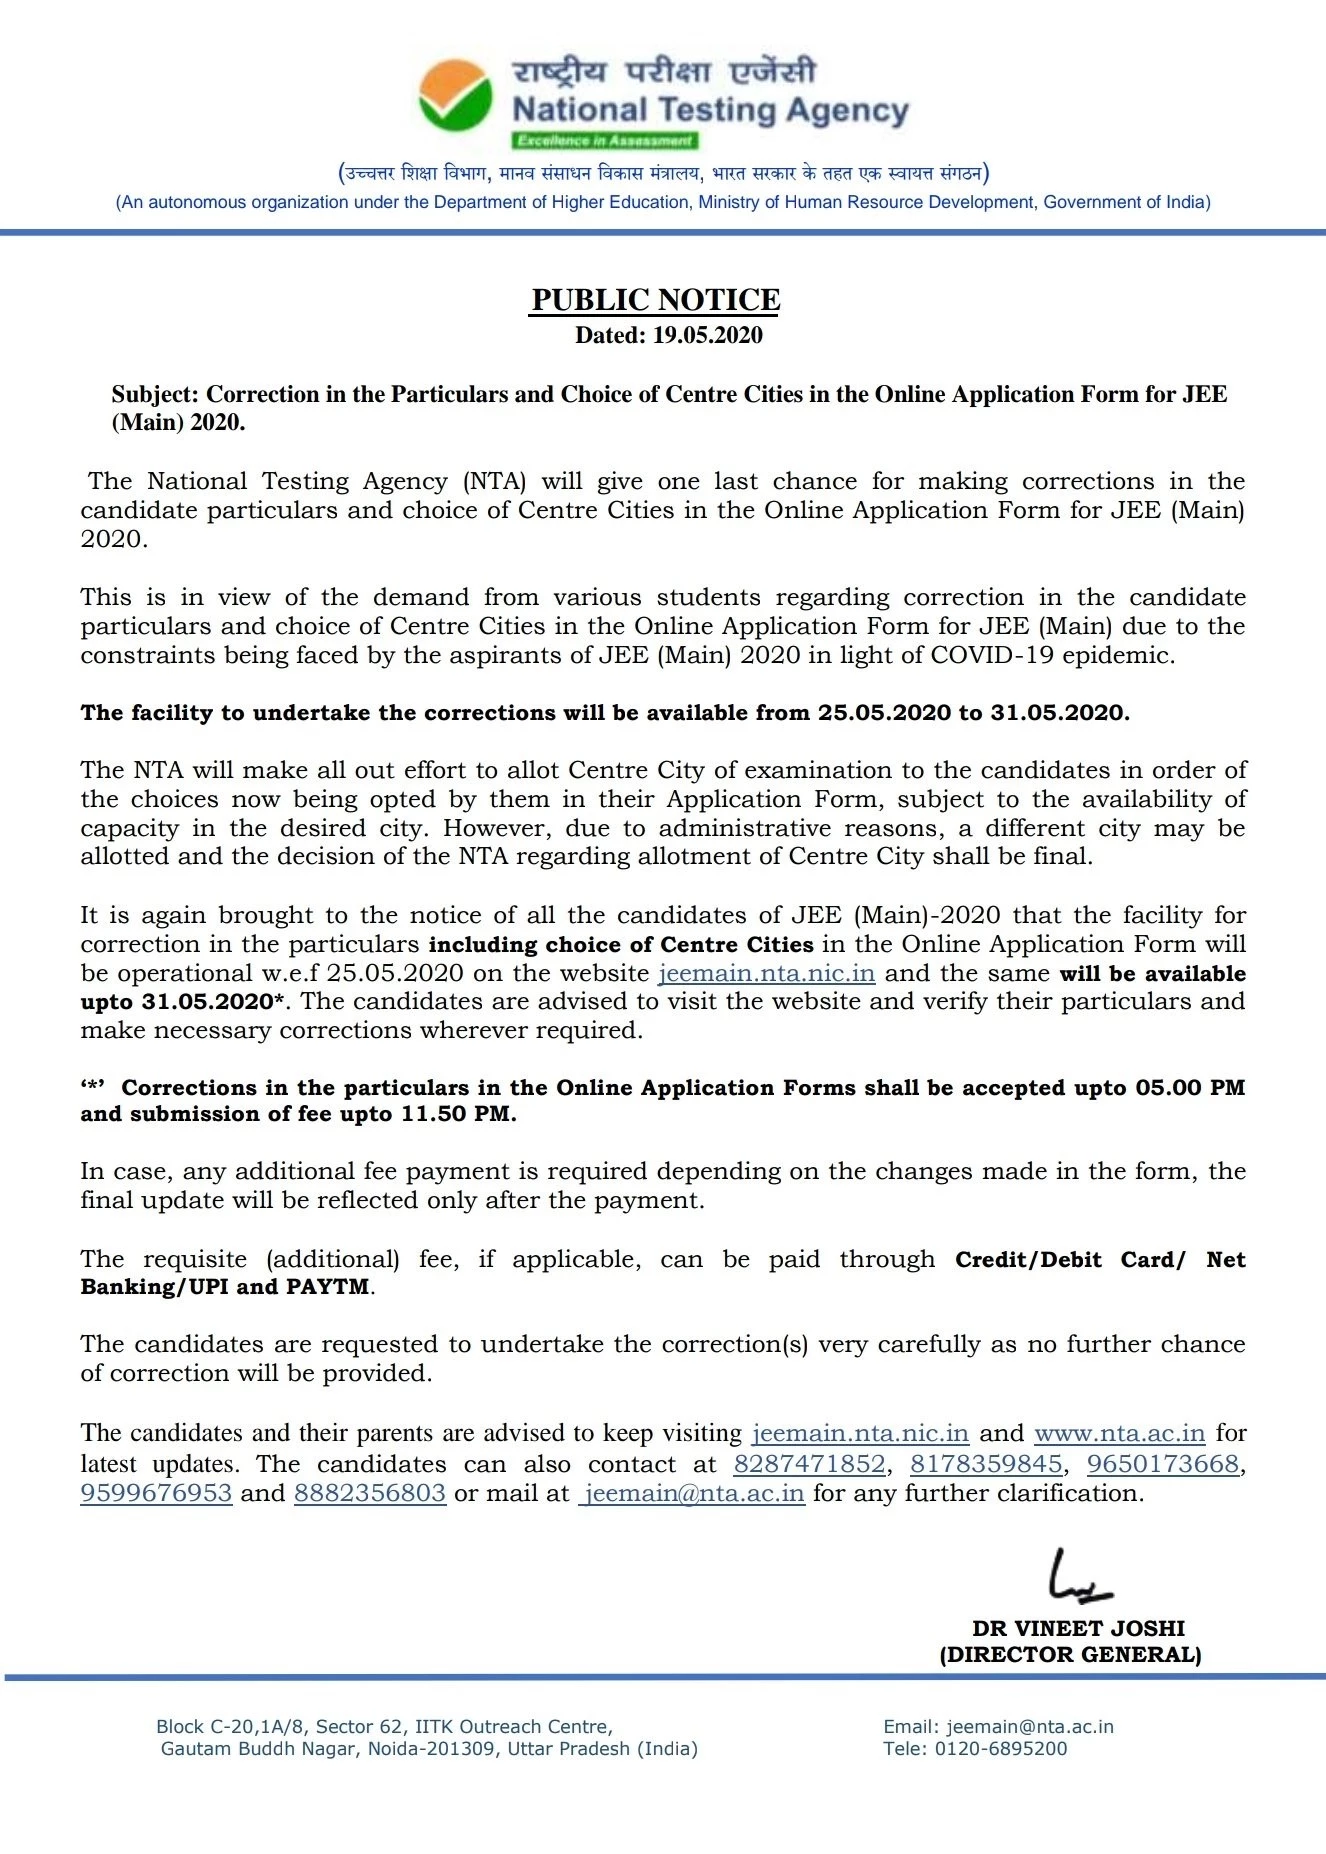 official public notice (dated 19 May 2020) as released by the National Testing Agency 